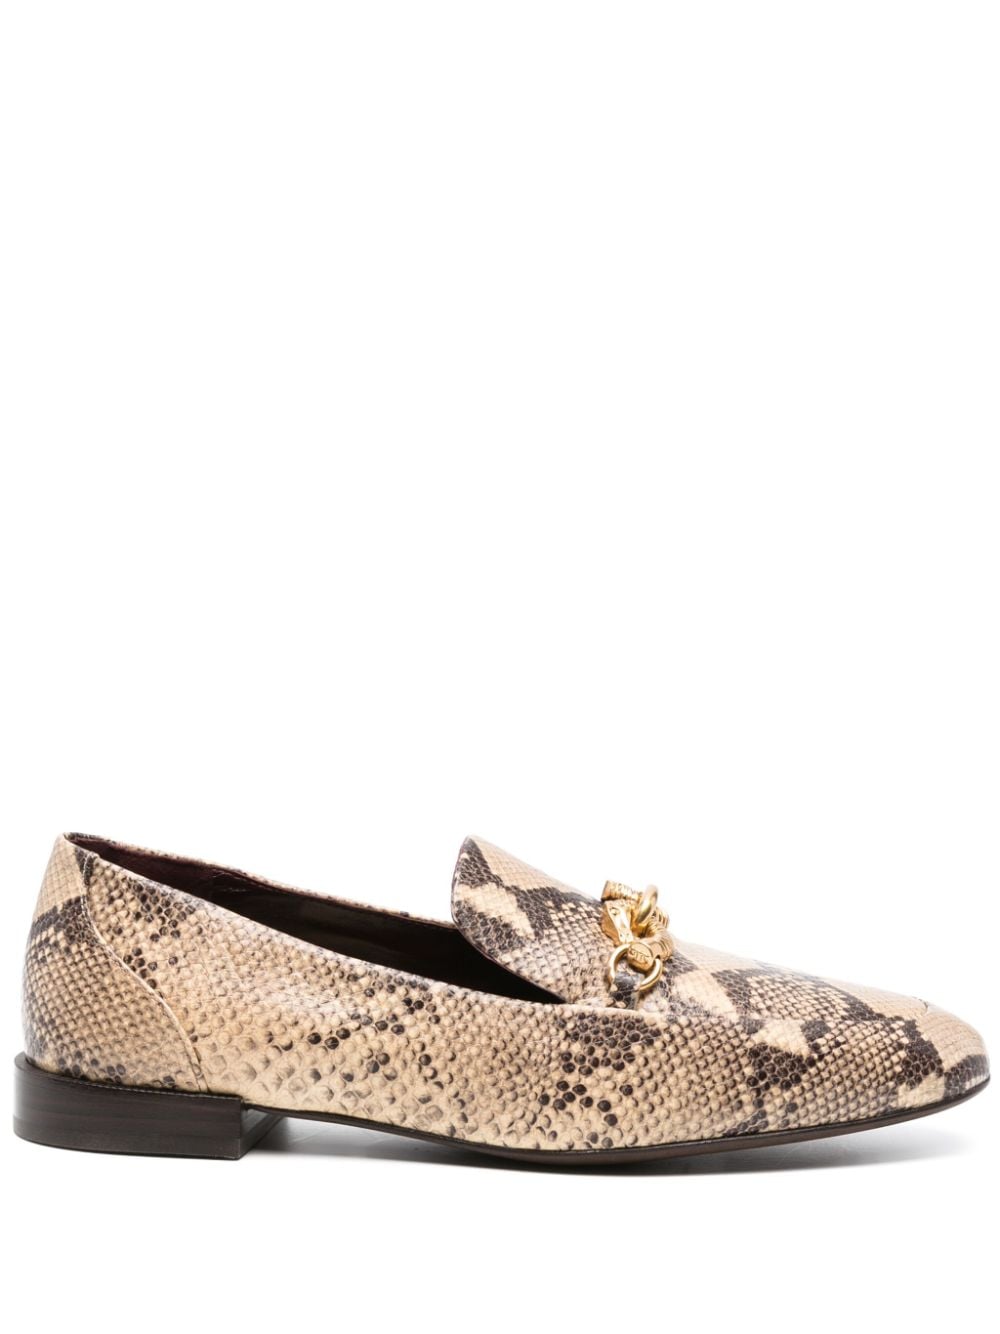 Shop Tory Burch Jessa Snakeskin Leather Loafers In Brown